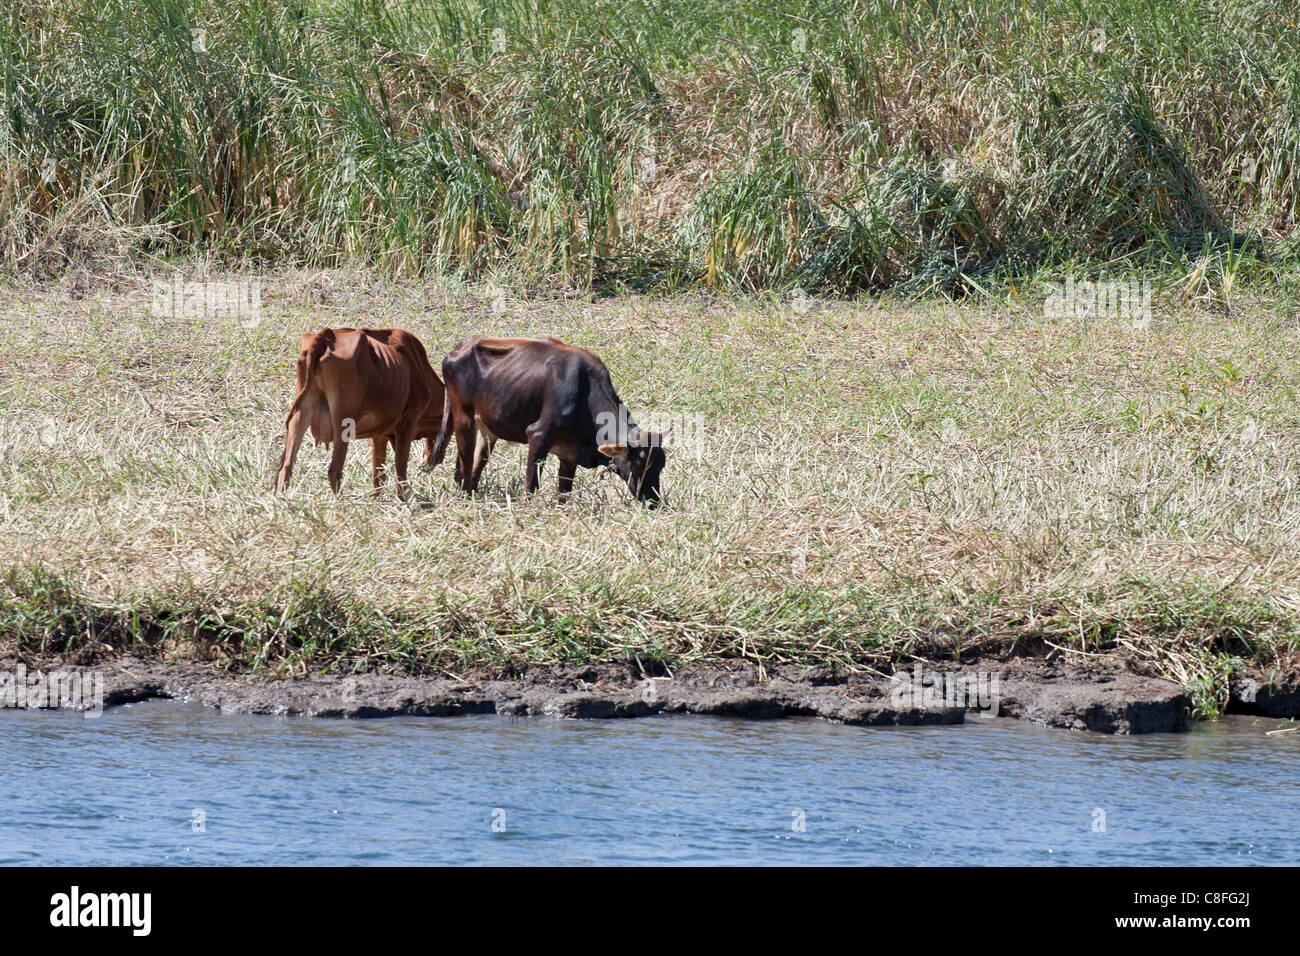 A section of Nile riverbank showing waters edge, grazing cattle and field crop in the background Stock Photo